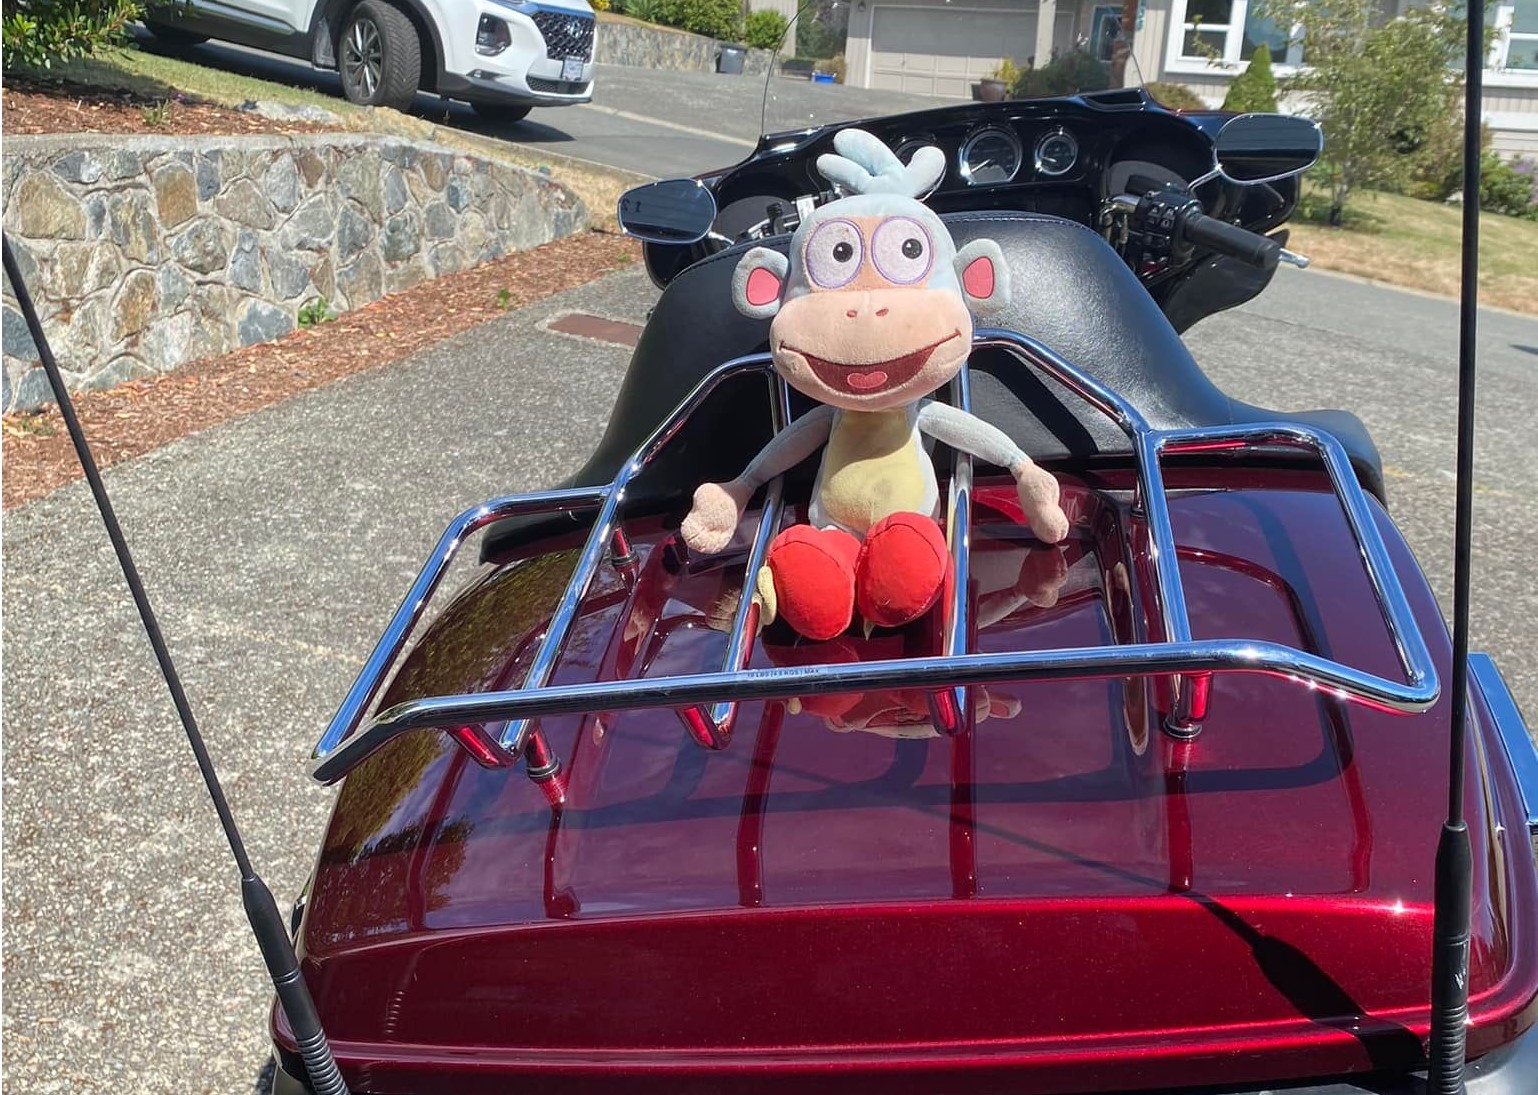 Motorcyclist hopes to reunite stuffed animal found near Osoyoos with owner  